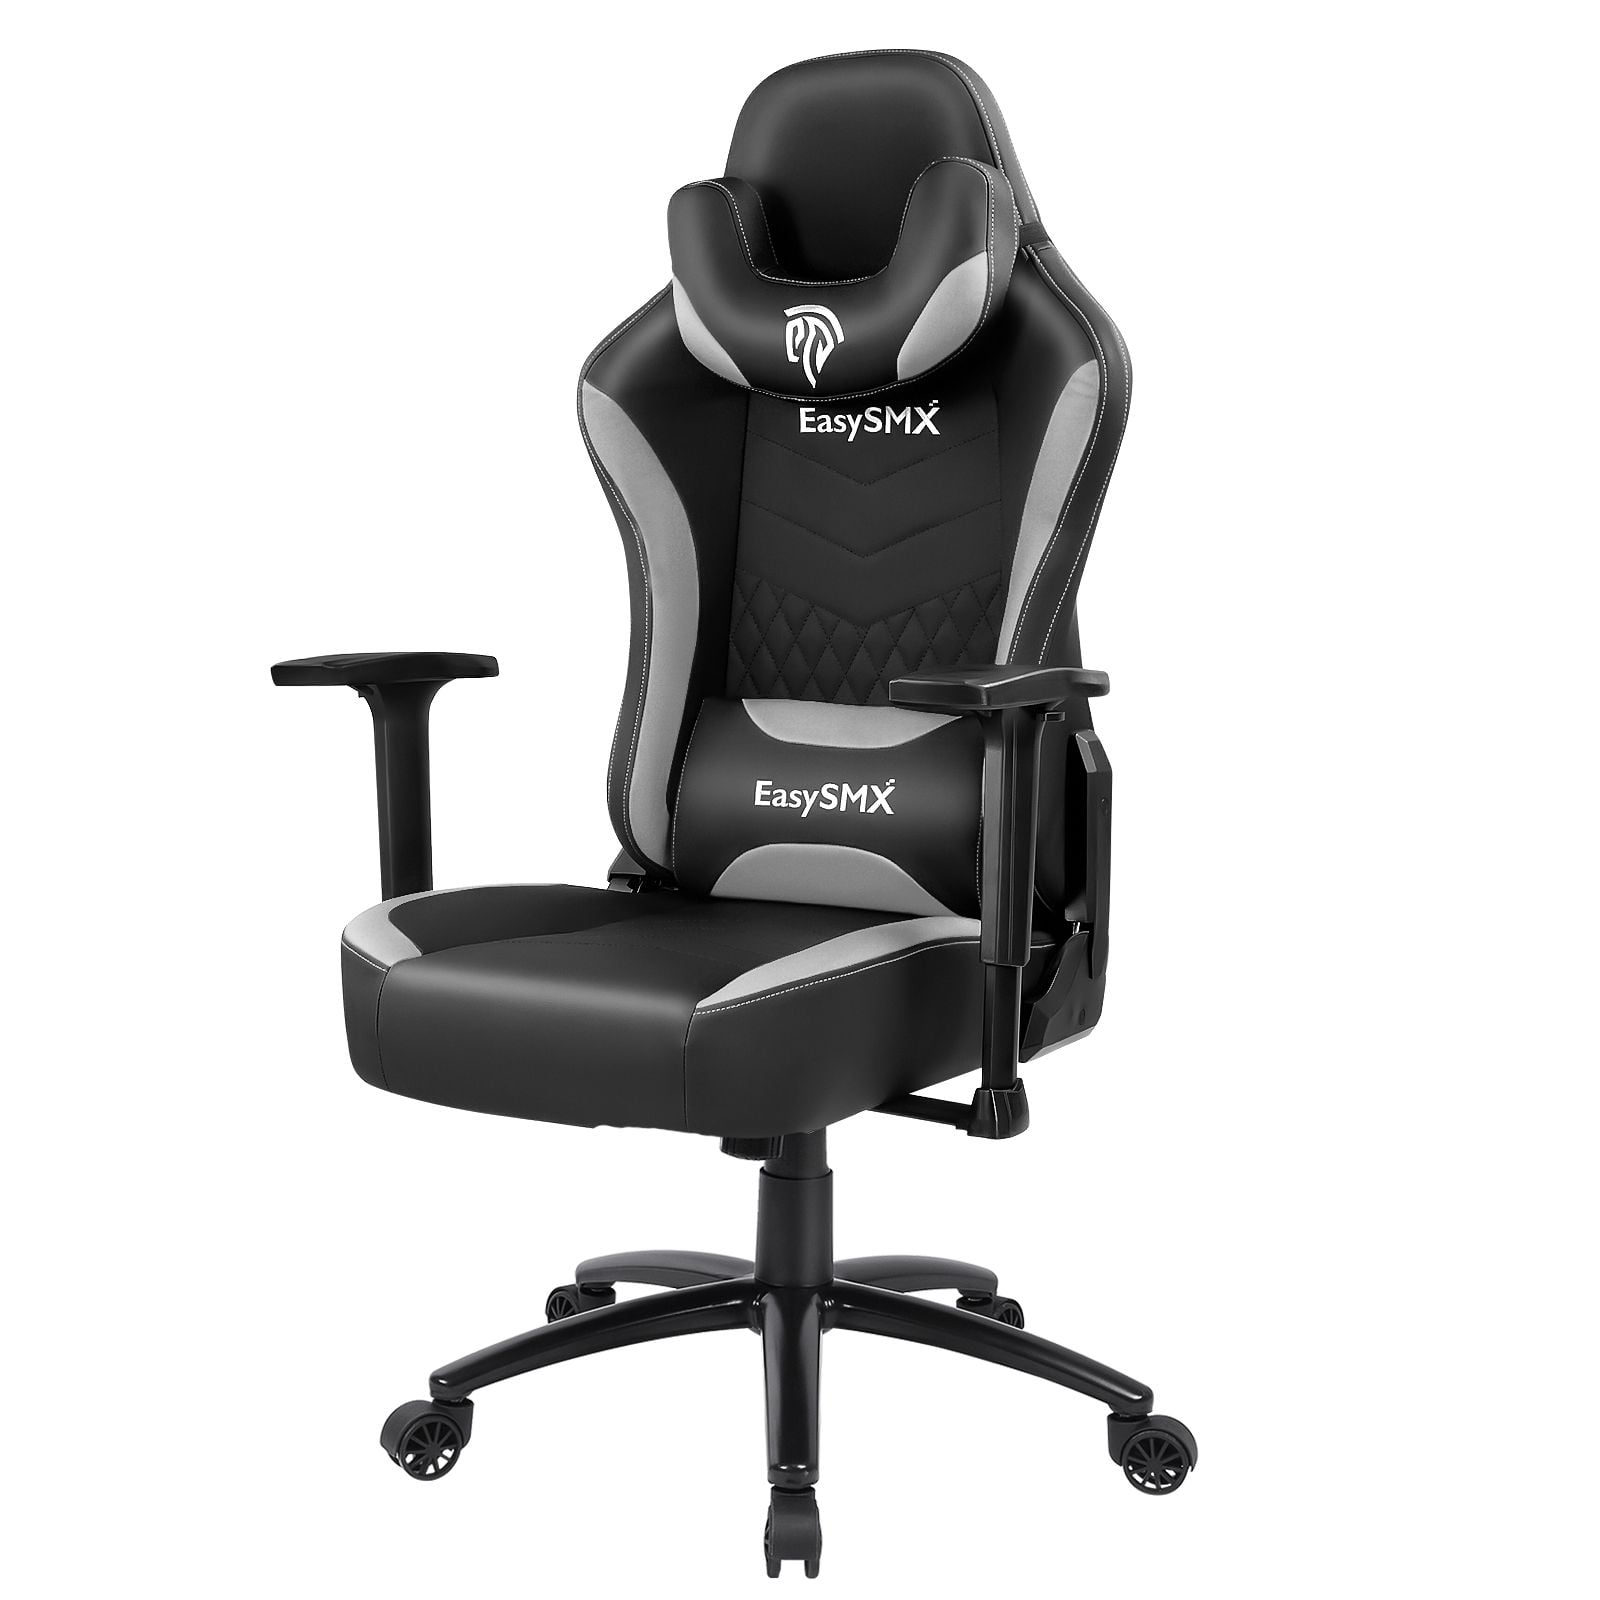 EasySMX Gamer Chair Fabric Gaming Chairs for Big and Tall People Computer Gaming Chair for Adults Teens Ergonomic Office Chair with Retractable Footrest and Headrest for Home and Office 